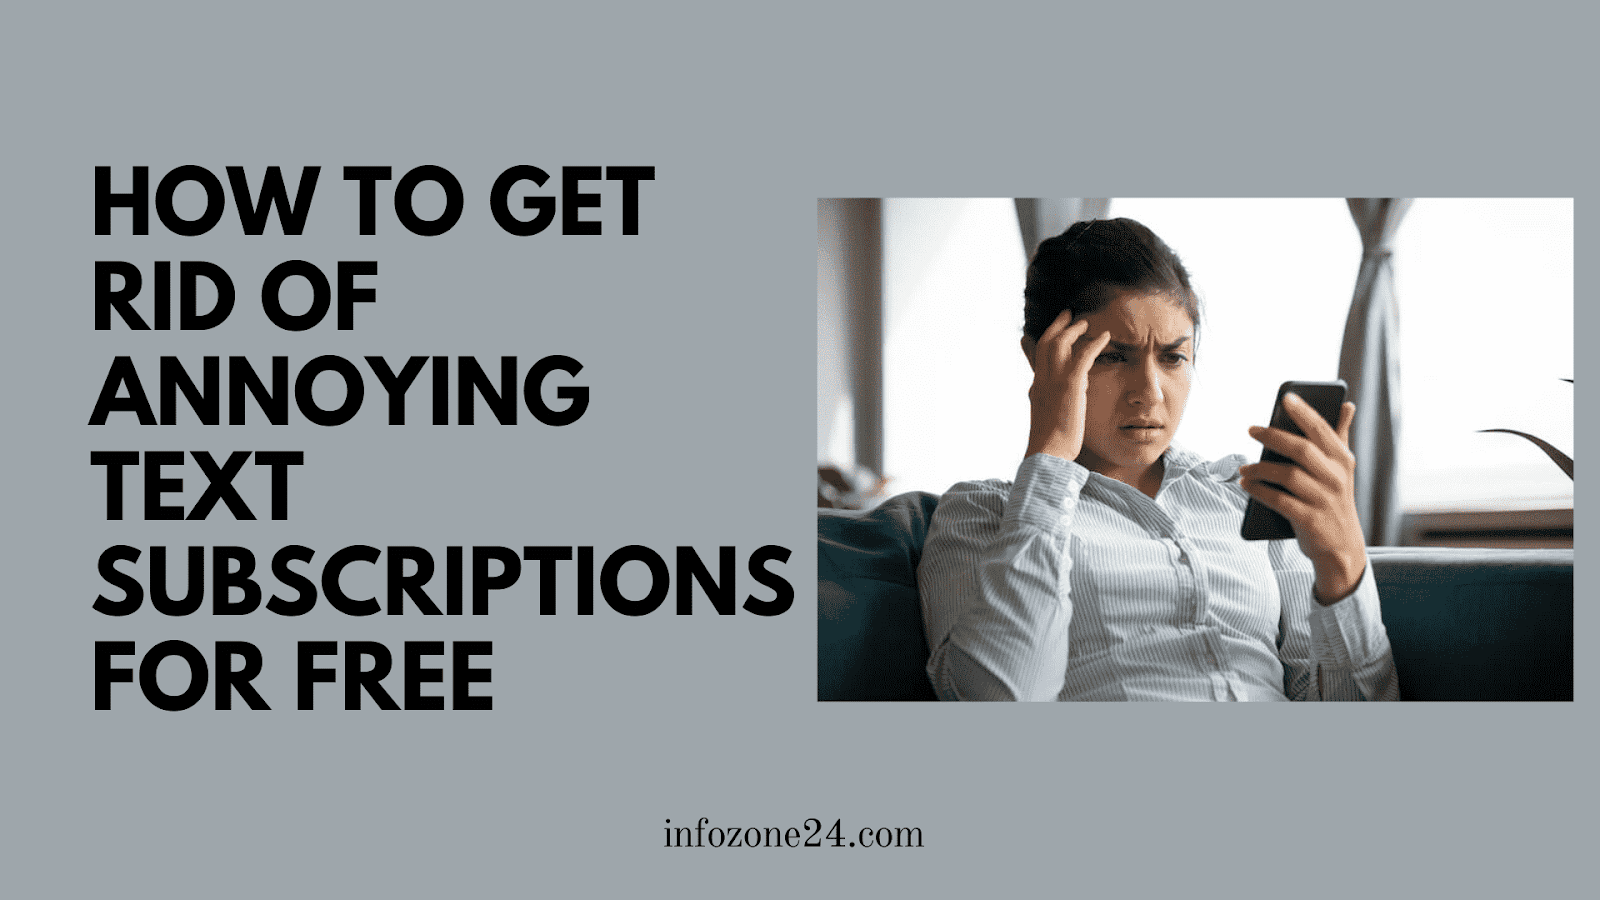 Get Rid of Annoying Text Subscriptions For Free